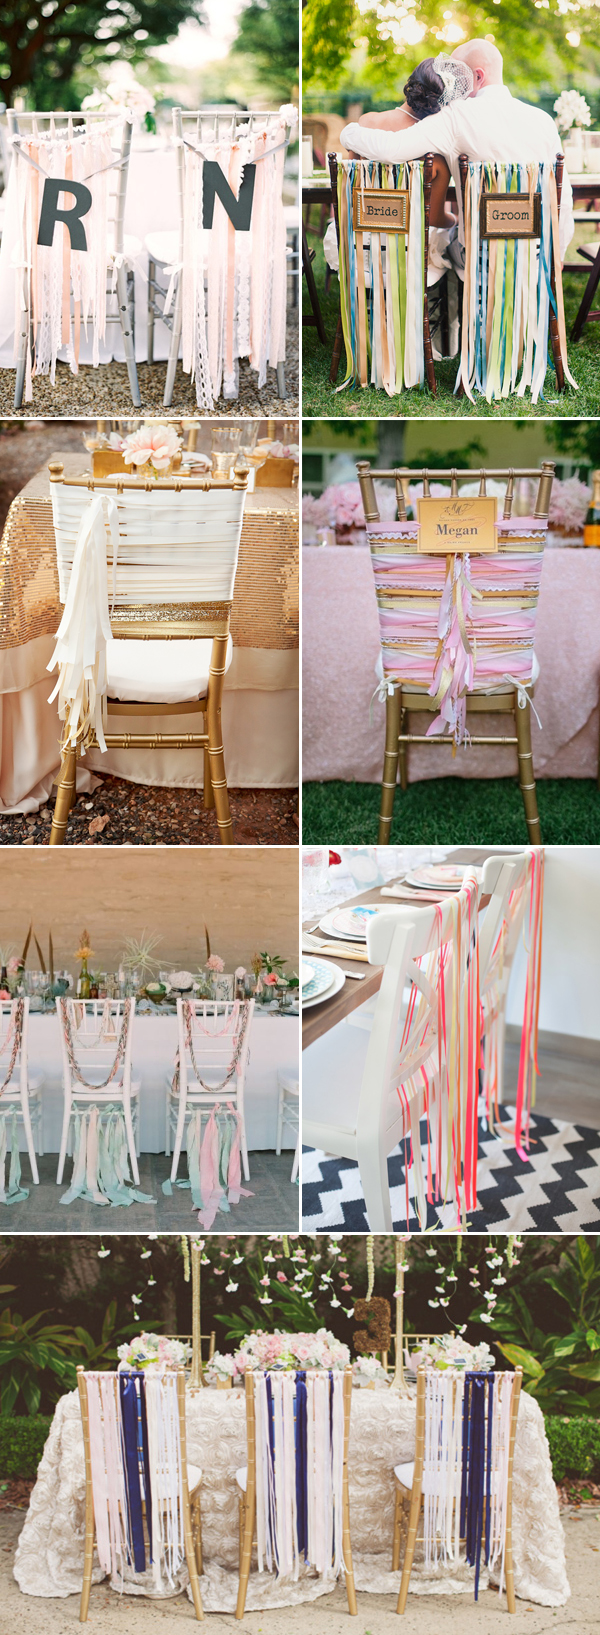 wedding chairs with ribbons